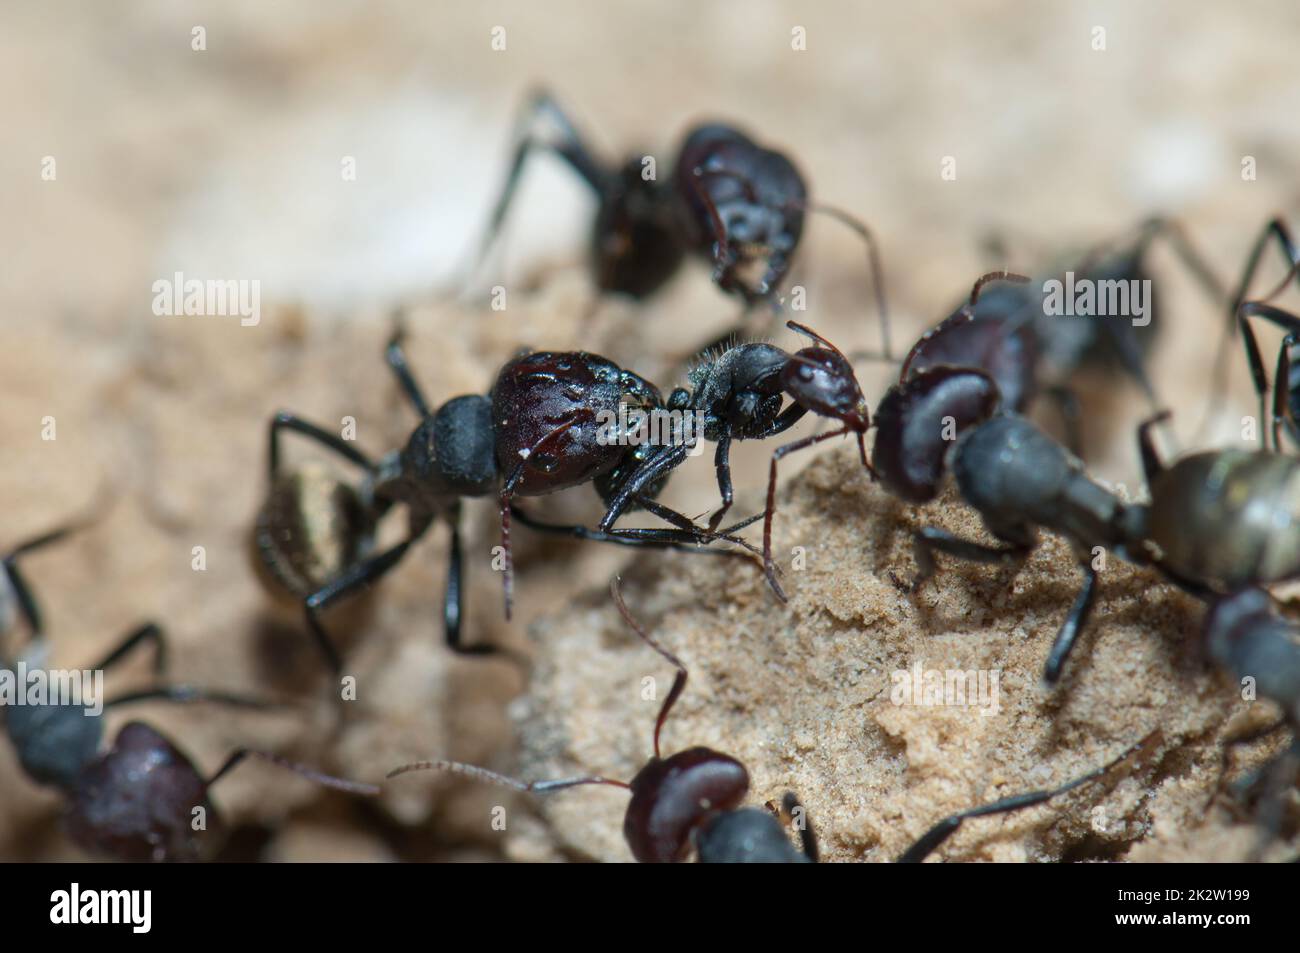 Golden backed ant Camponotus sericeus attacking another one. Stock Photo